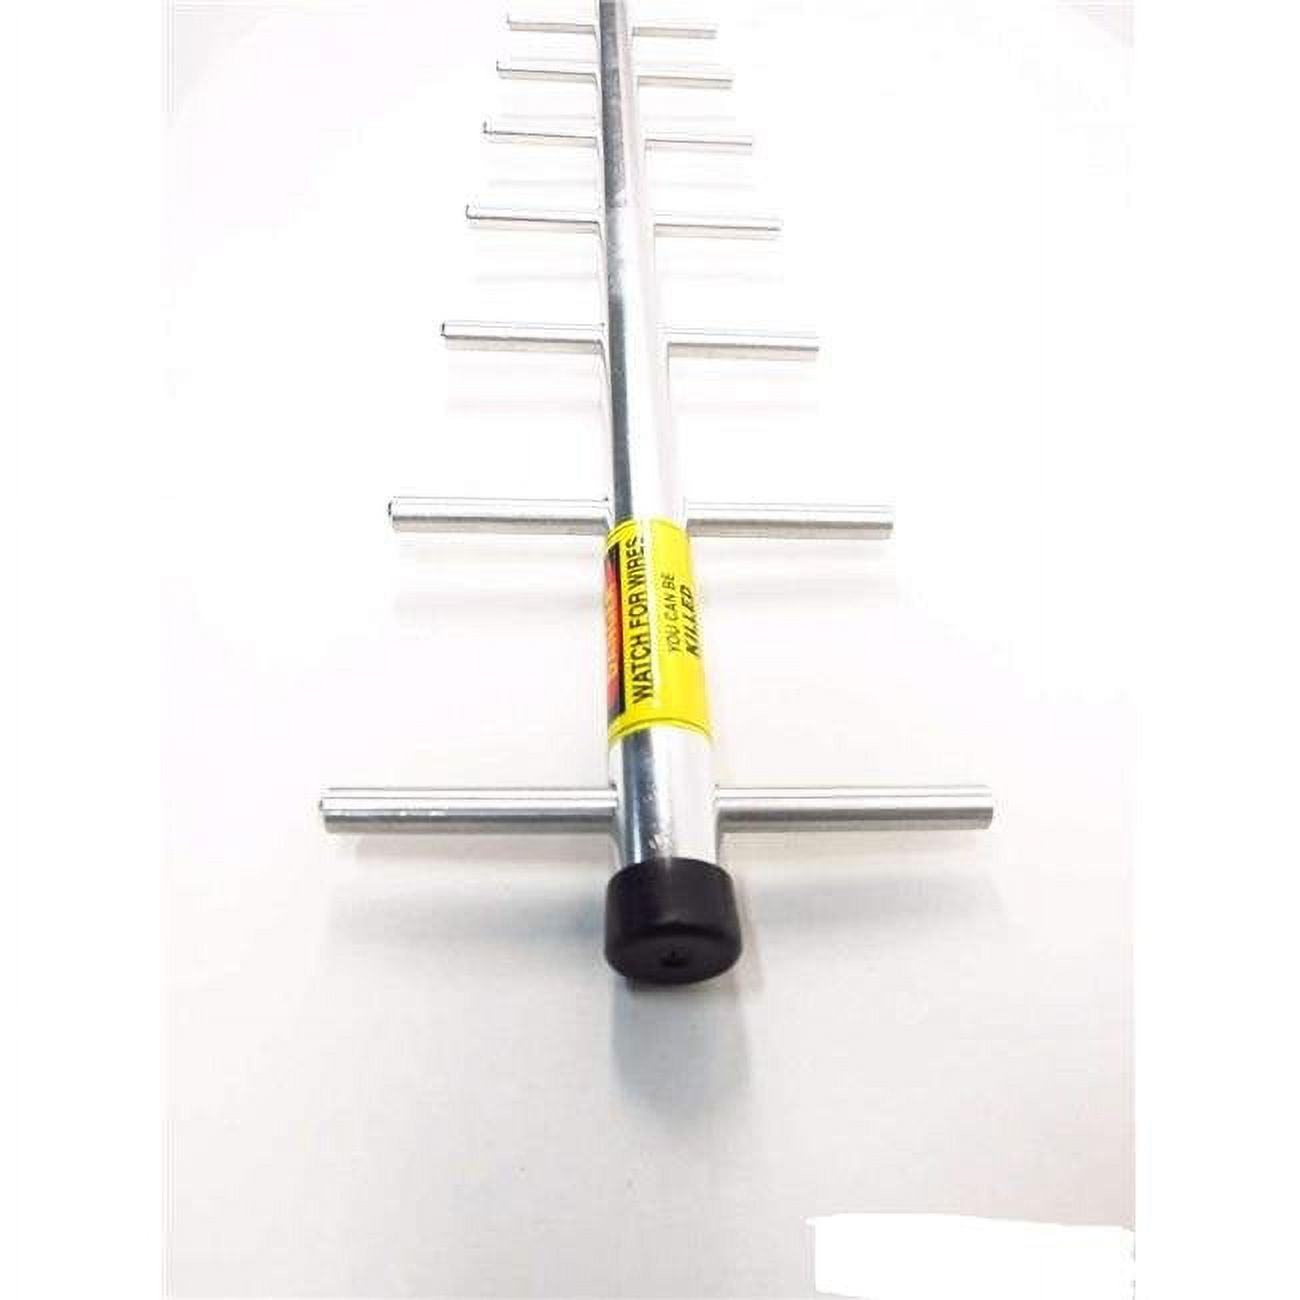 Picture of Barjan 7639 0.25 x 1.5 in. Phillips Screwdriver